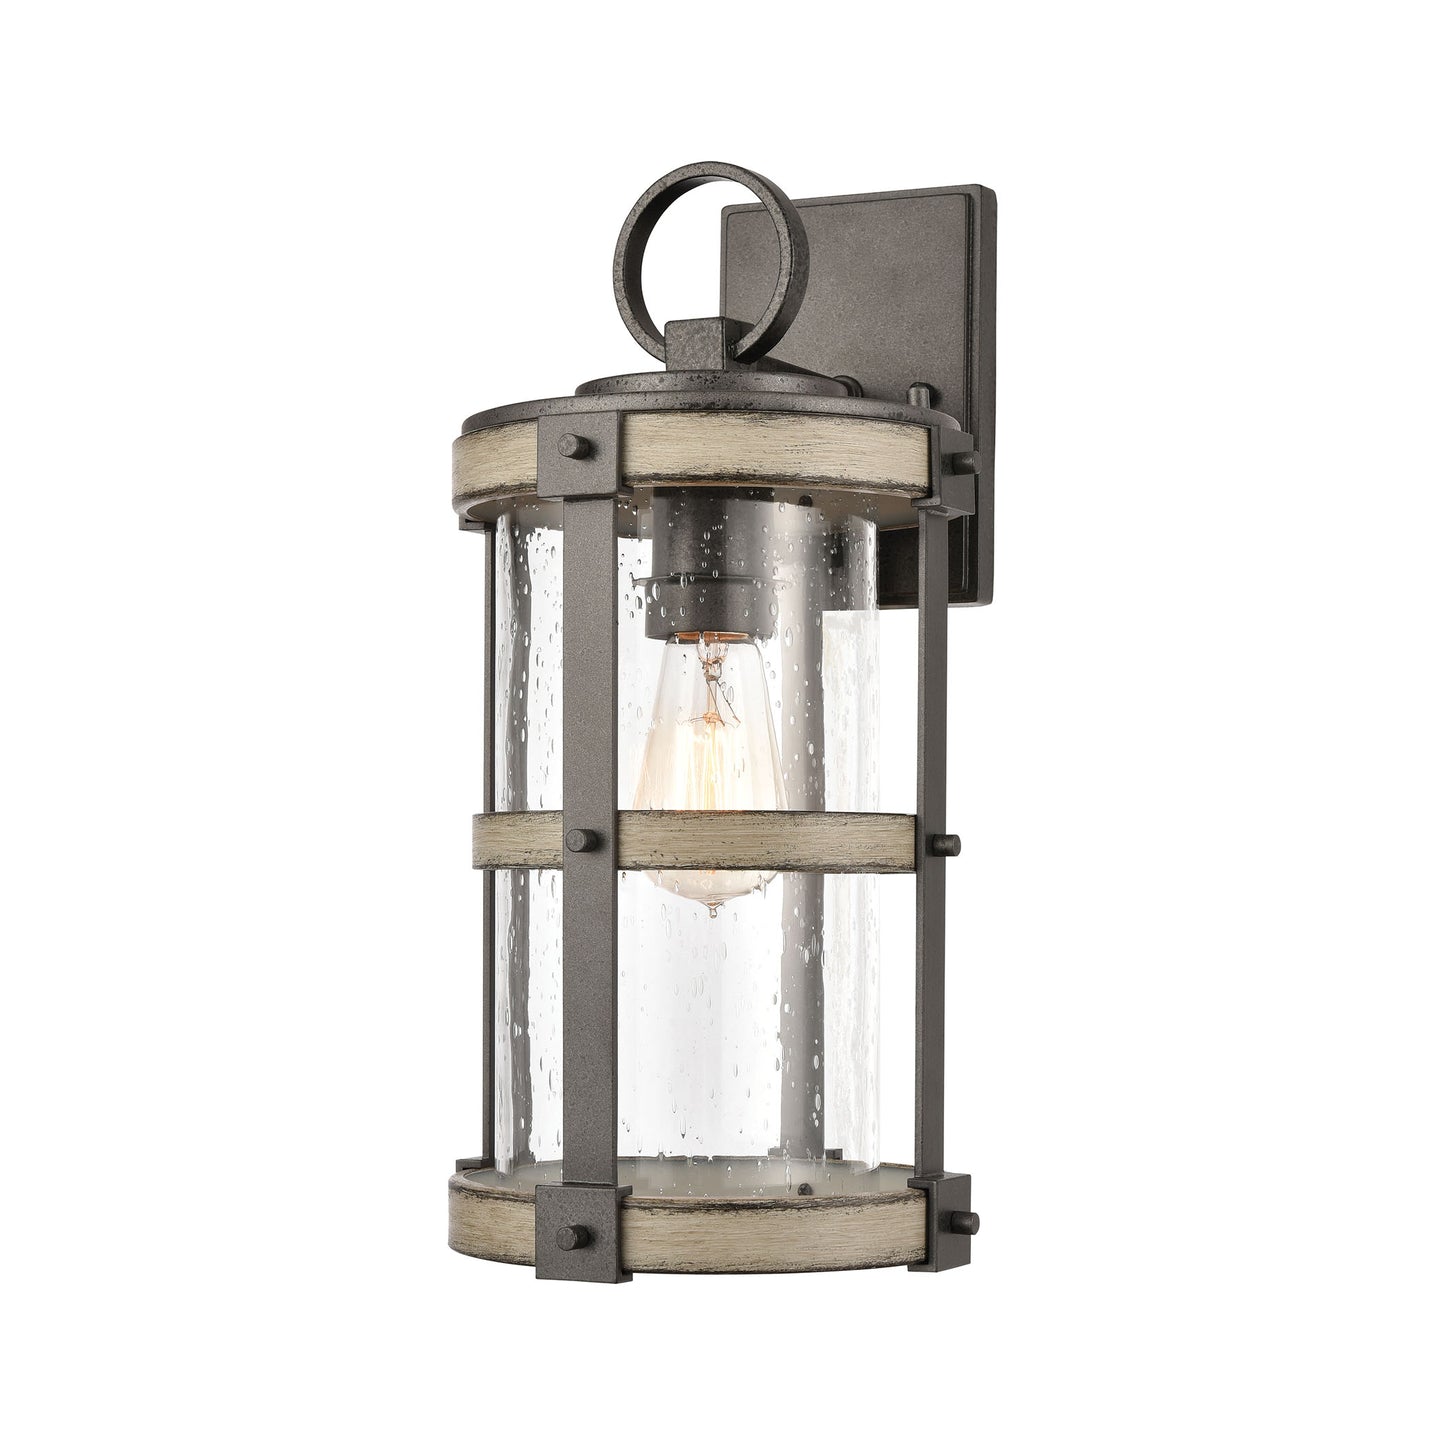 ELK Lighting 89145/1 - Crenshaw 8" Wide 1-Light Outdoor Sconce in Anvil Iron and Distressed Antique